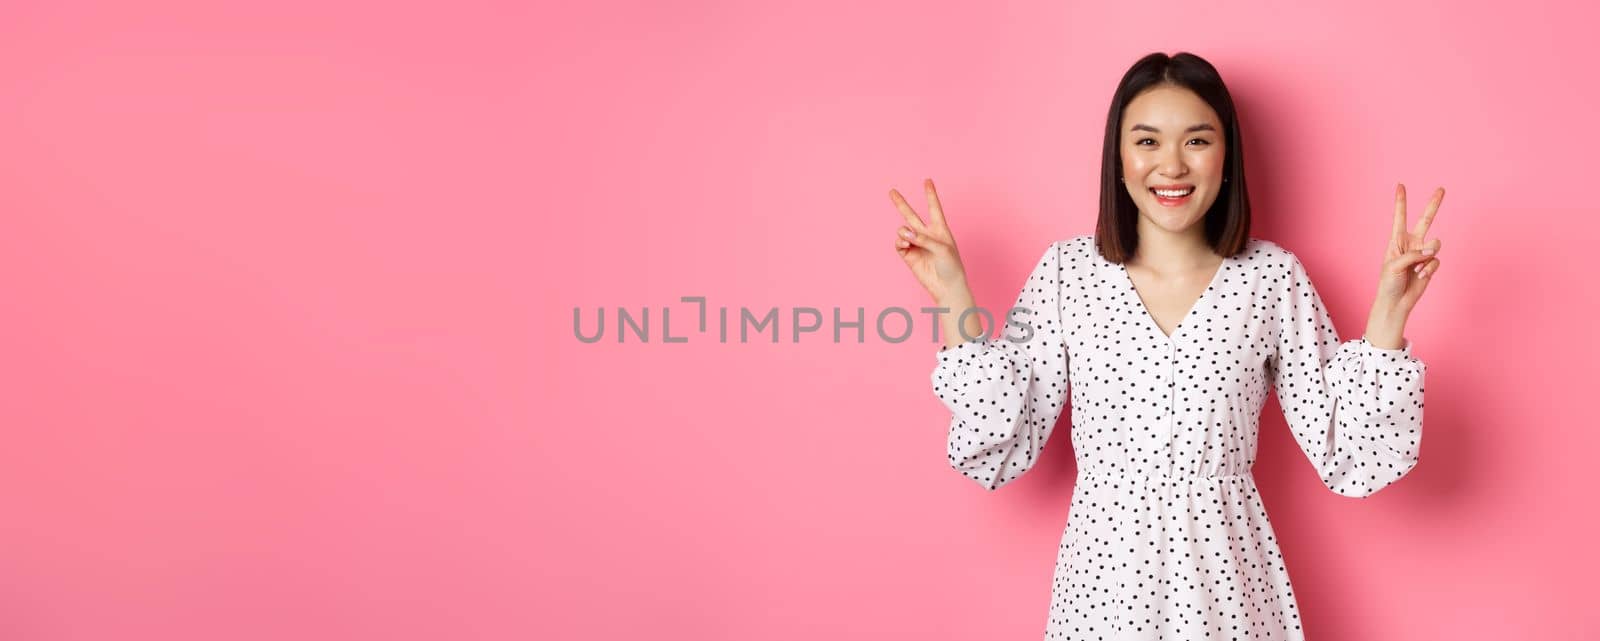 Cute asian brunette girl in dress smiling, showing kawaii peace signs and looking happy, standing over pink background.